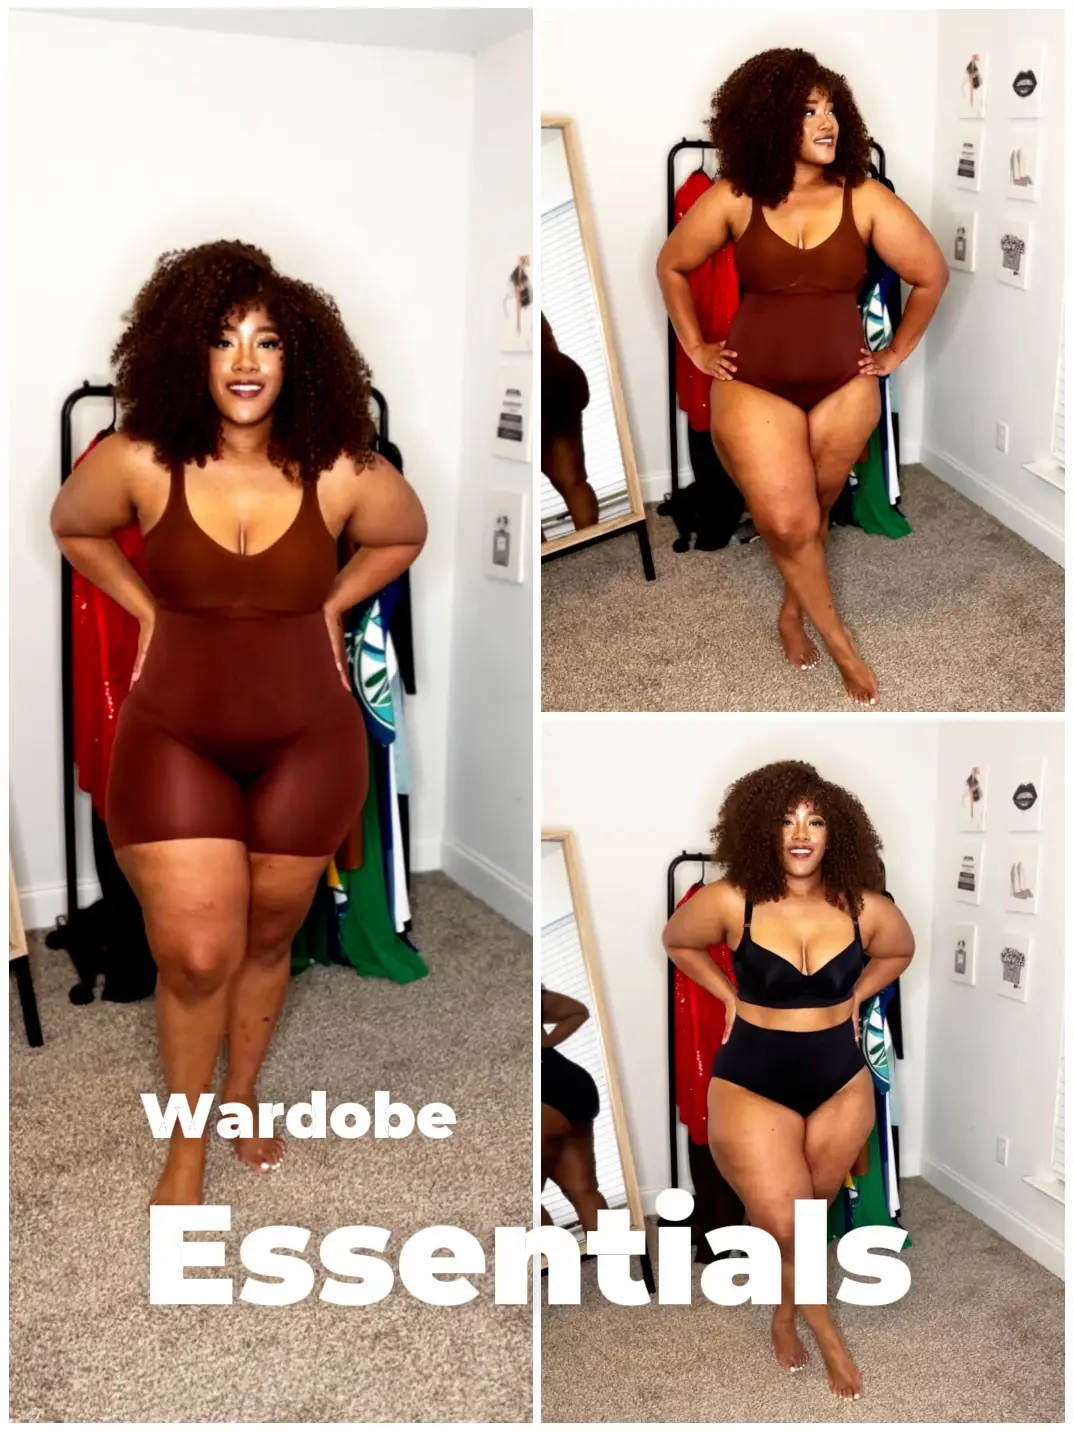 Achieve the perfect hourglass figure with Shapellx shapewear - Baby  Budgeting